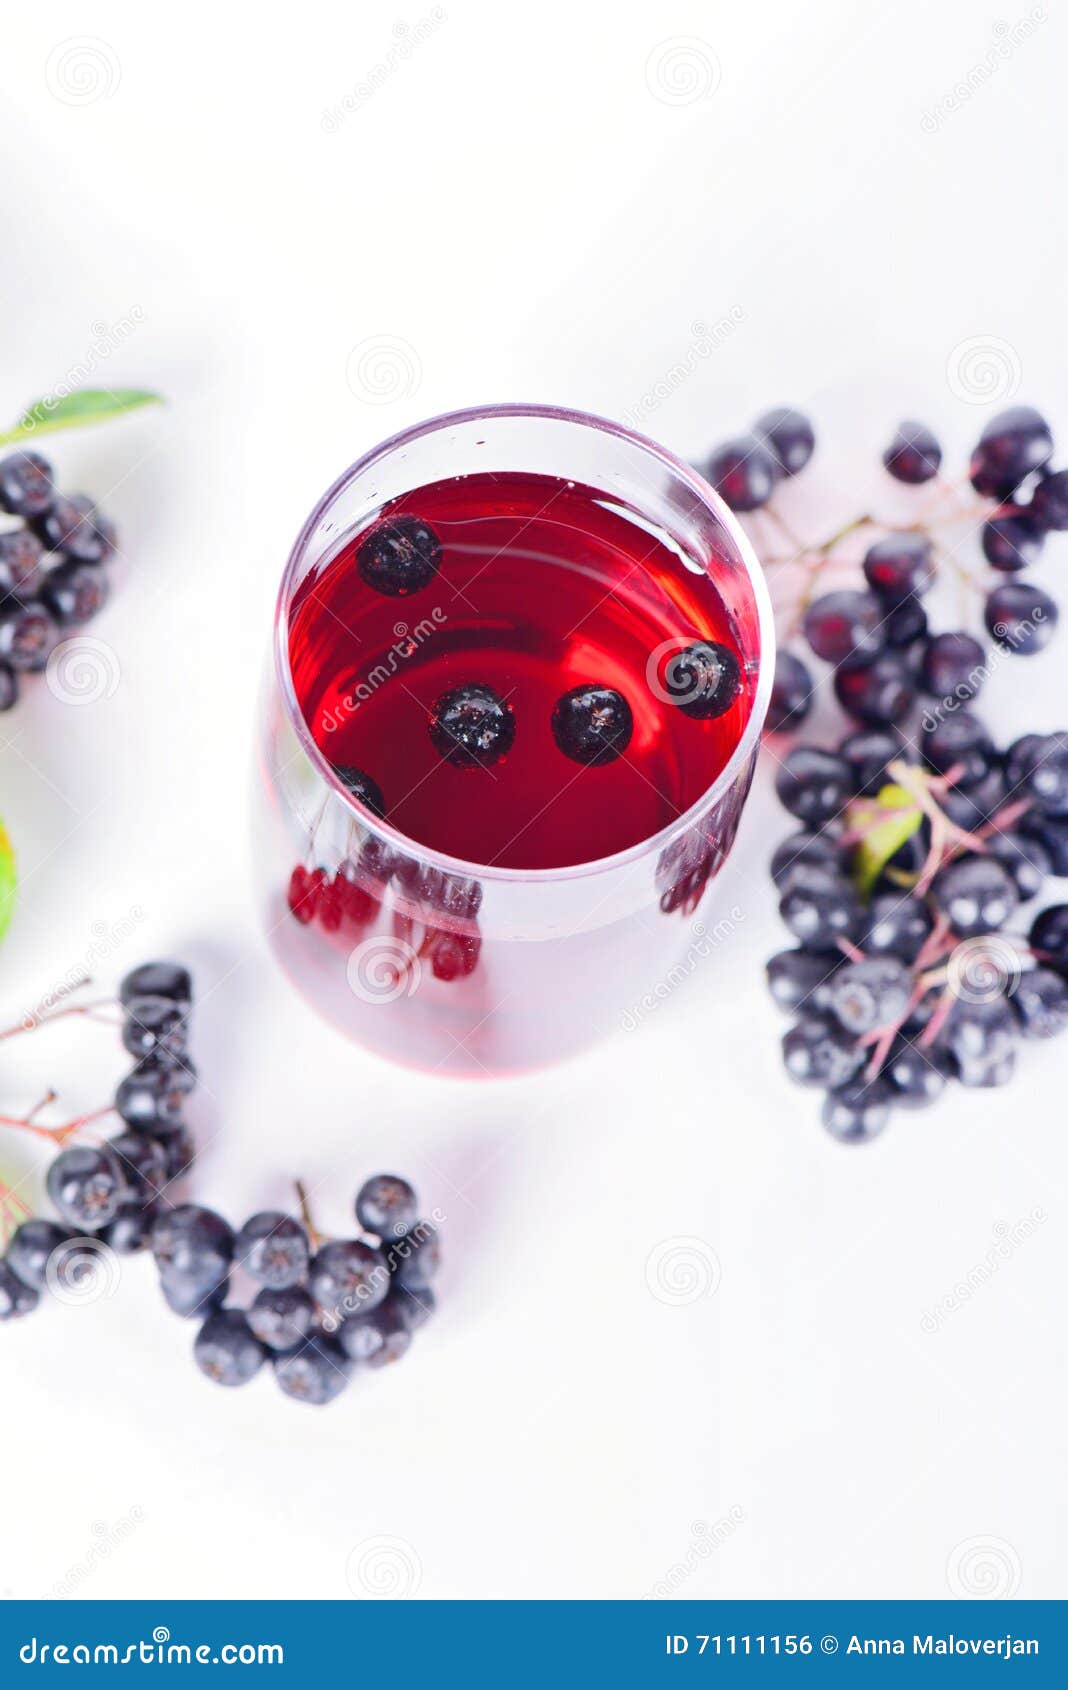 glass of aronia juice with berries, overhead view